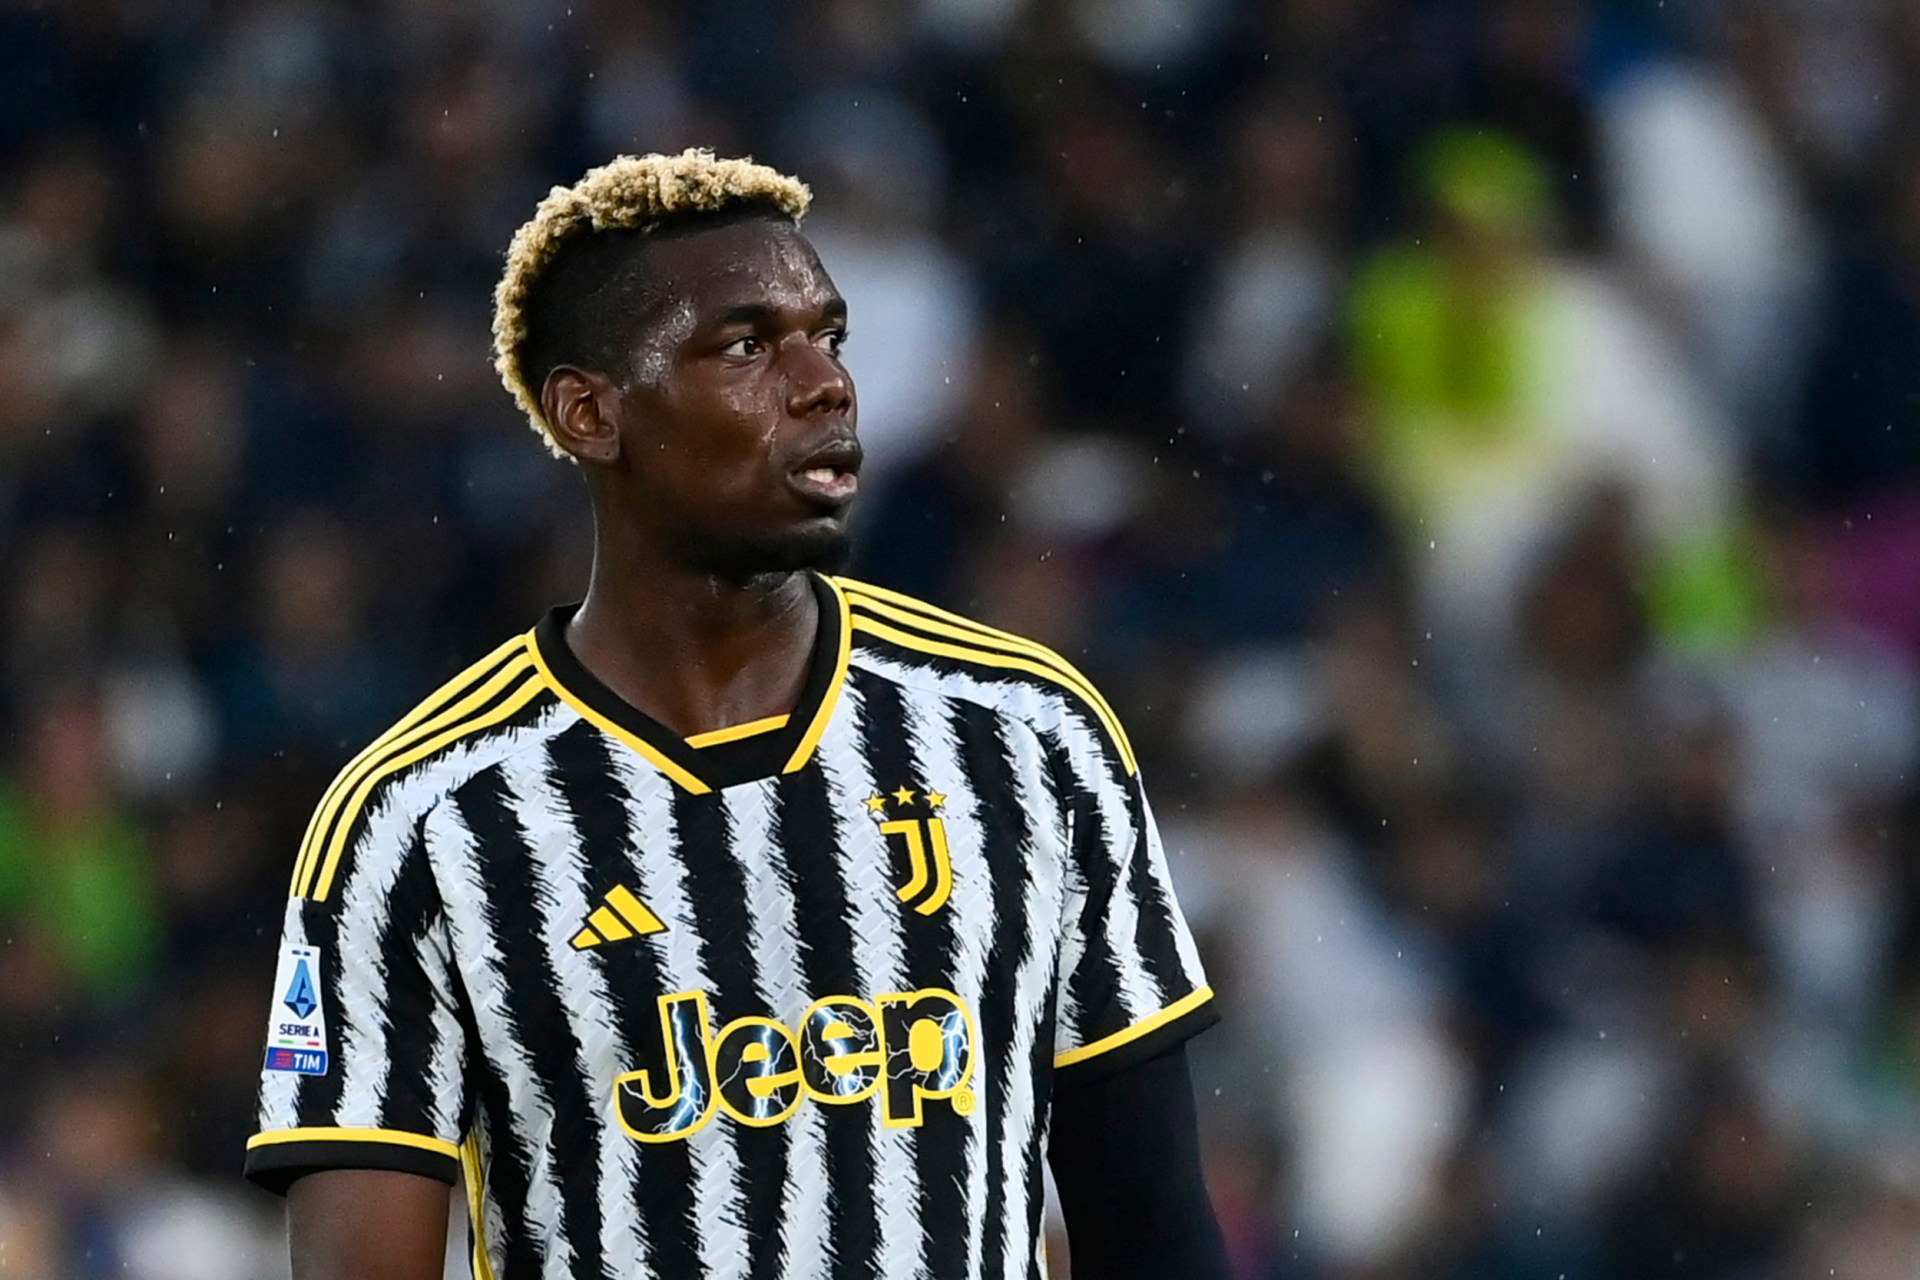 Paul Pogba issues statement after four-year ban from football for doping